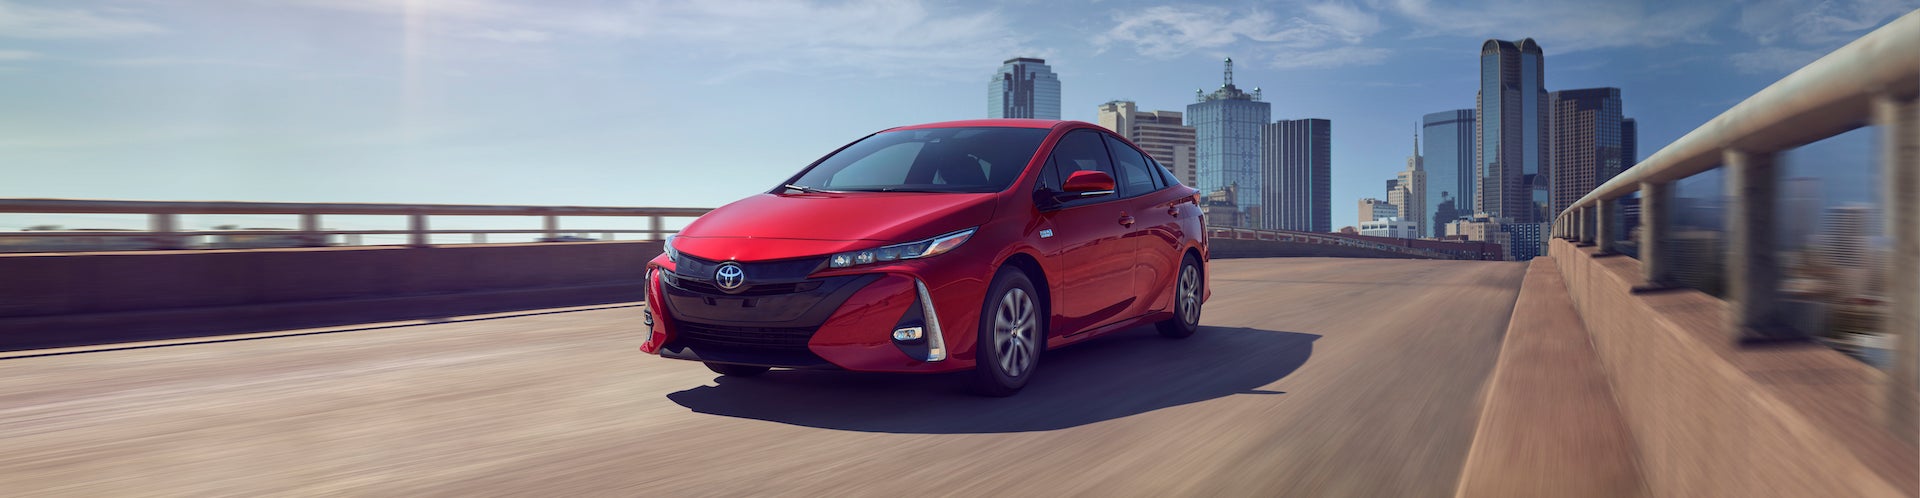 Bennett Toyota of Lebanon is a Car Dealership near Harrisburg, PA | 2020 Toyota Prius Prime driving away from city